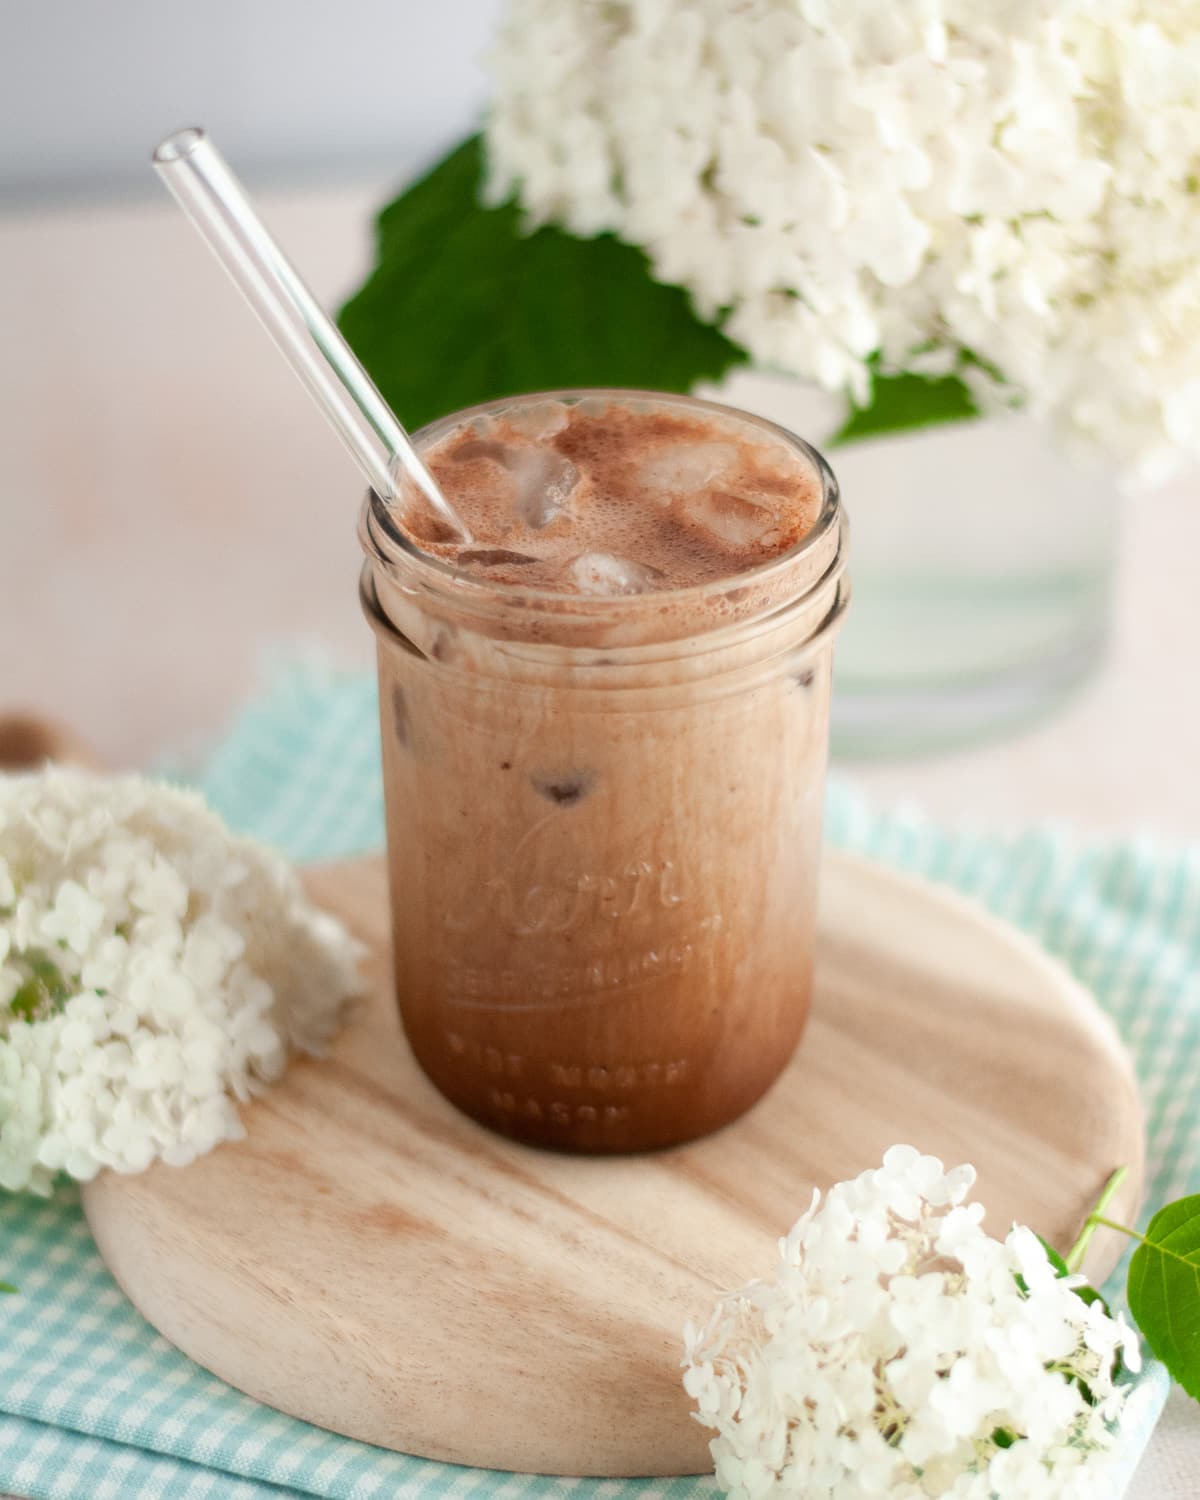 mason jar filled with a frothy iced chocolate shaken espresso with a glass straw. the glass sits on a wooden board and is surrounded by a blue and white checkered linen and hydrangea flowers.